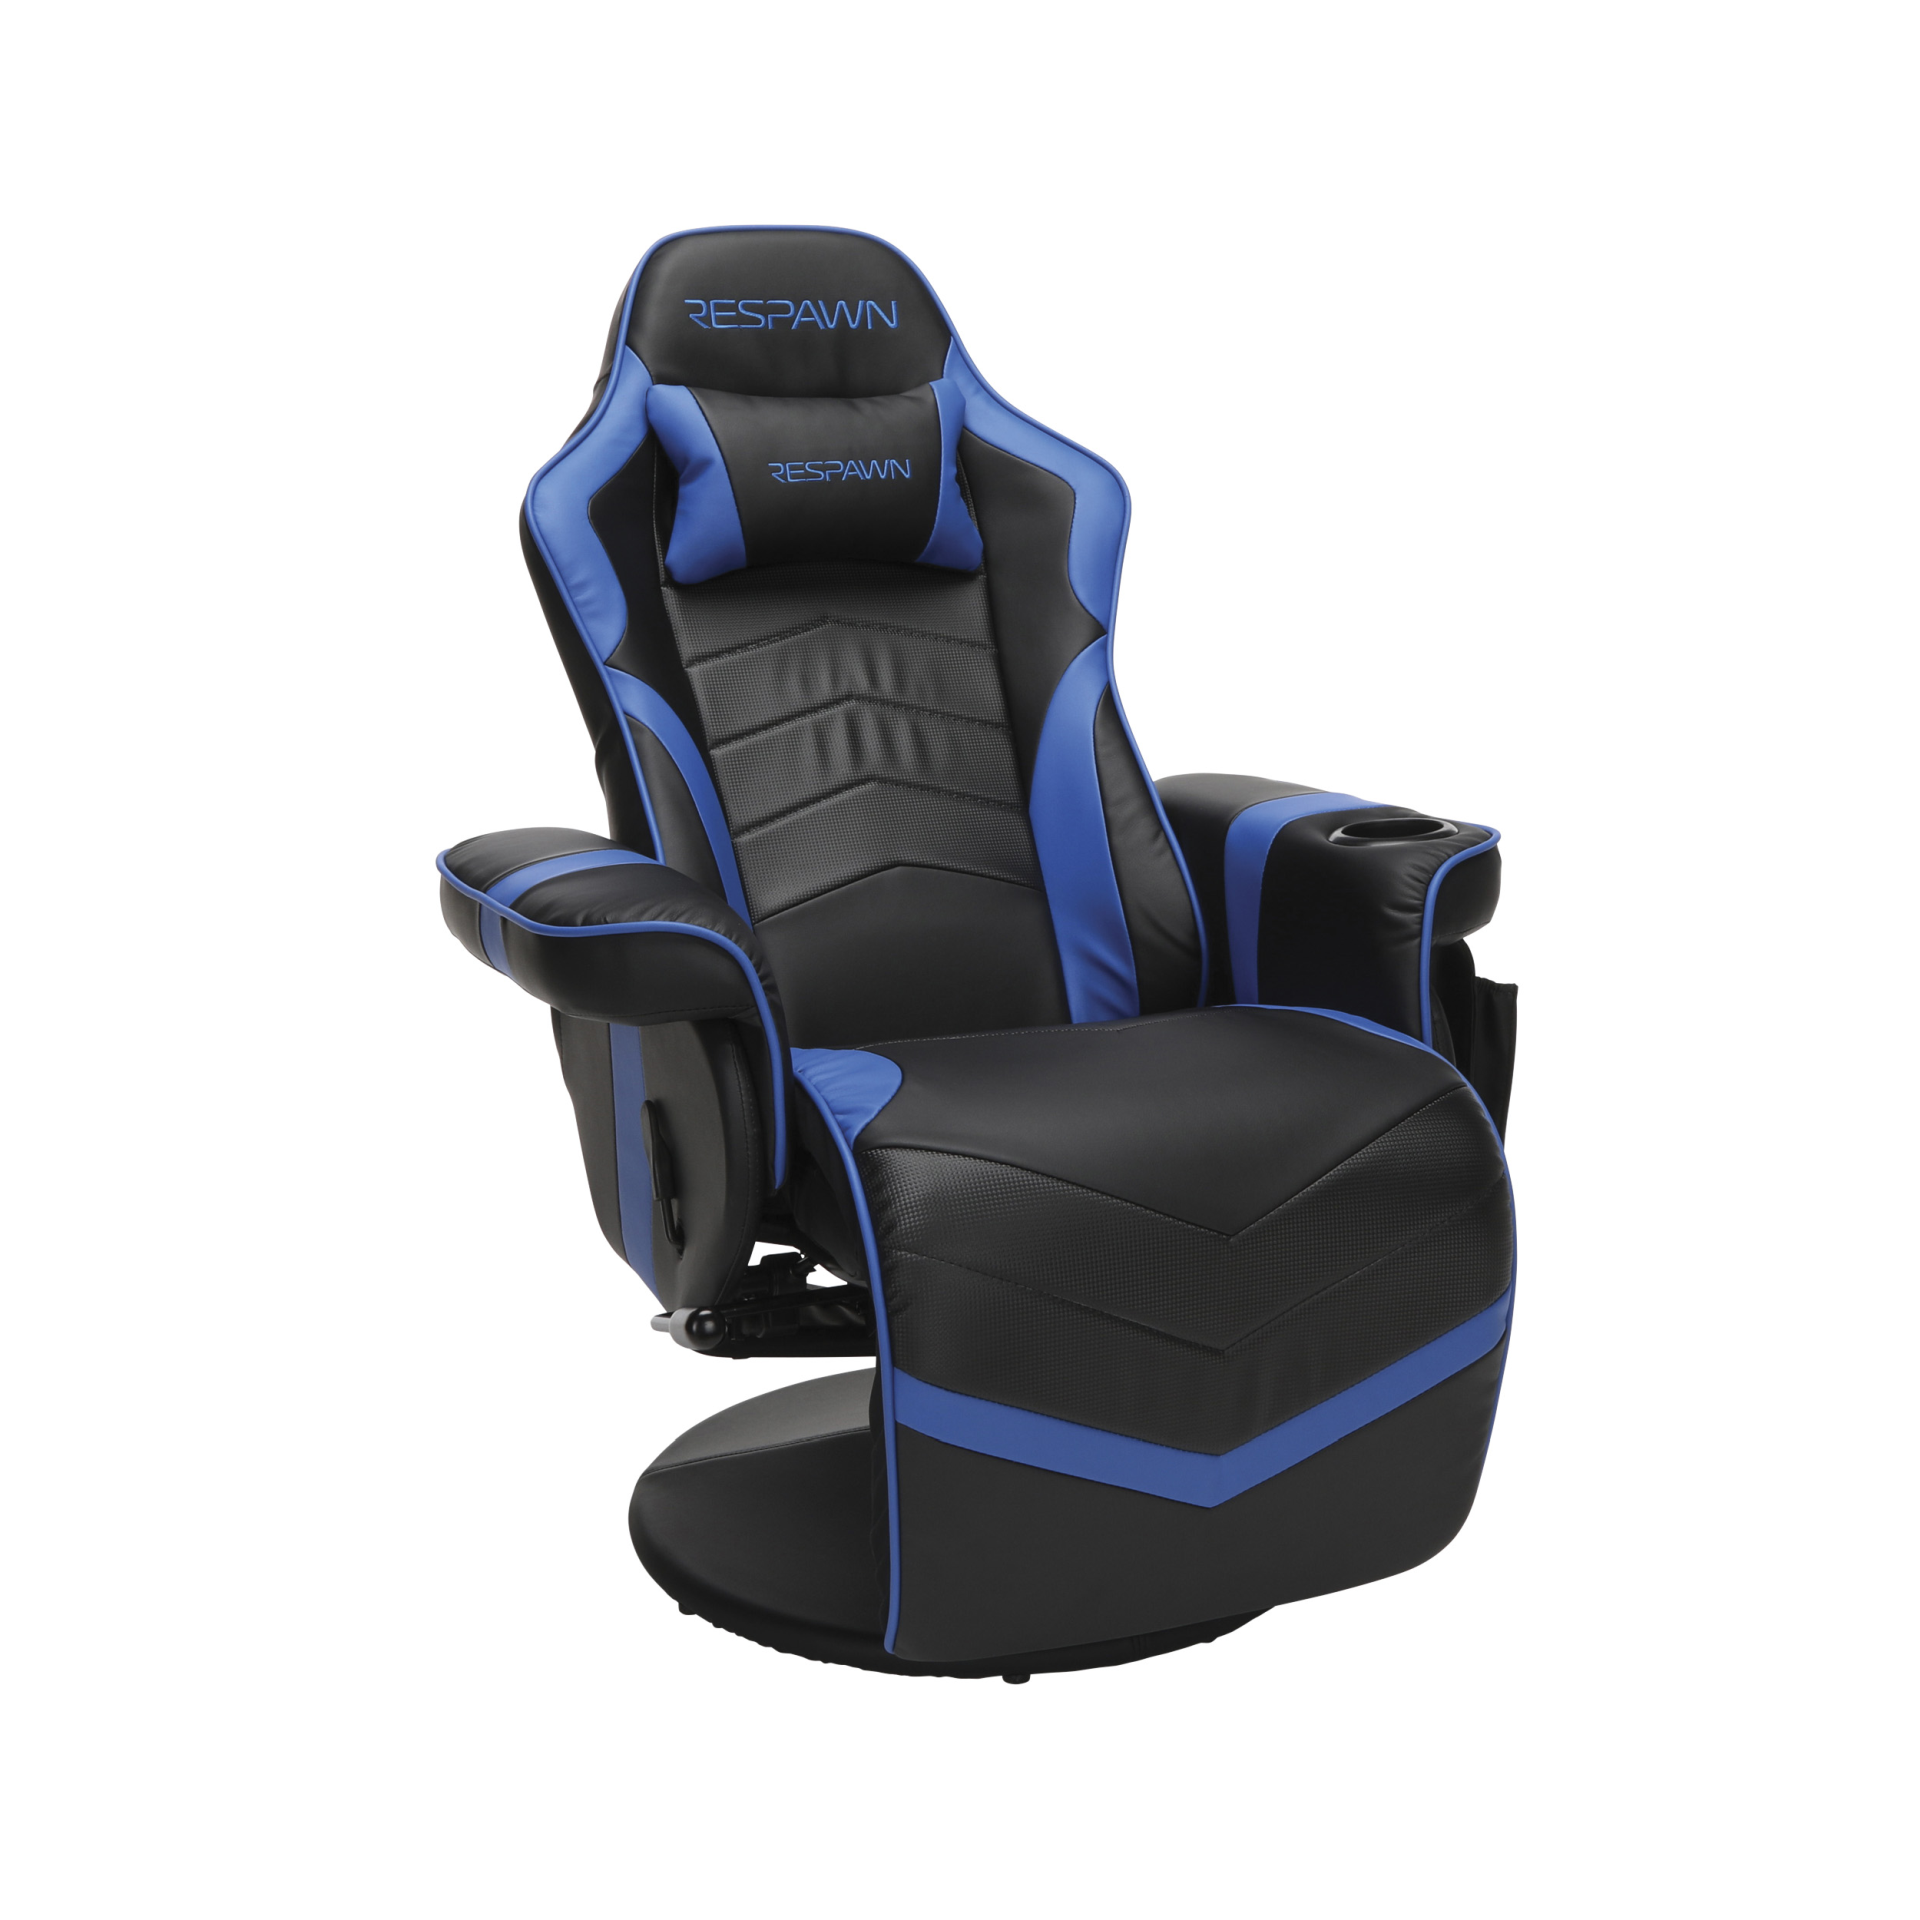 RESPAWN RSP-900 Gaming Recliner #9